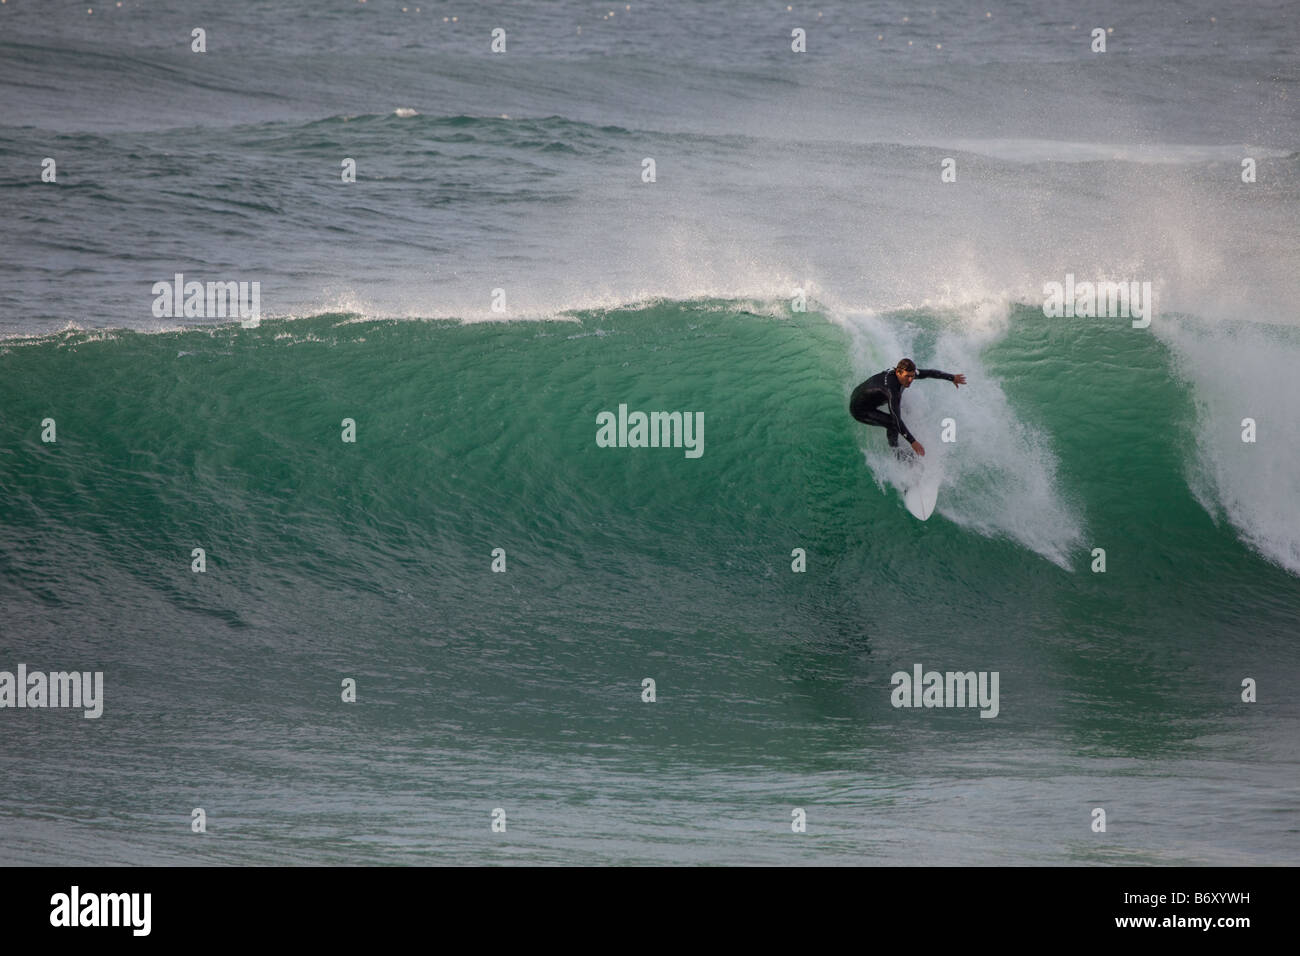 Surfer dropping a wave at Guincho beach, Portugal Stock Photo